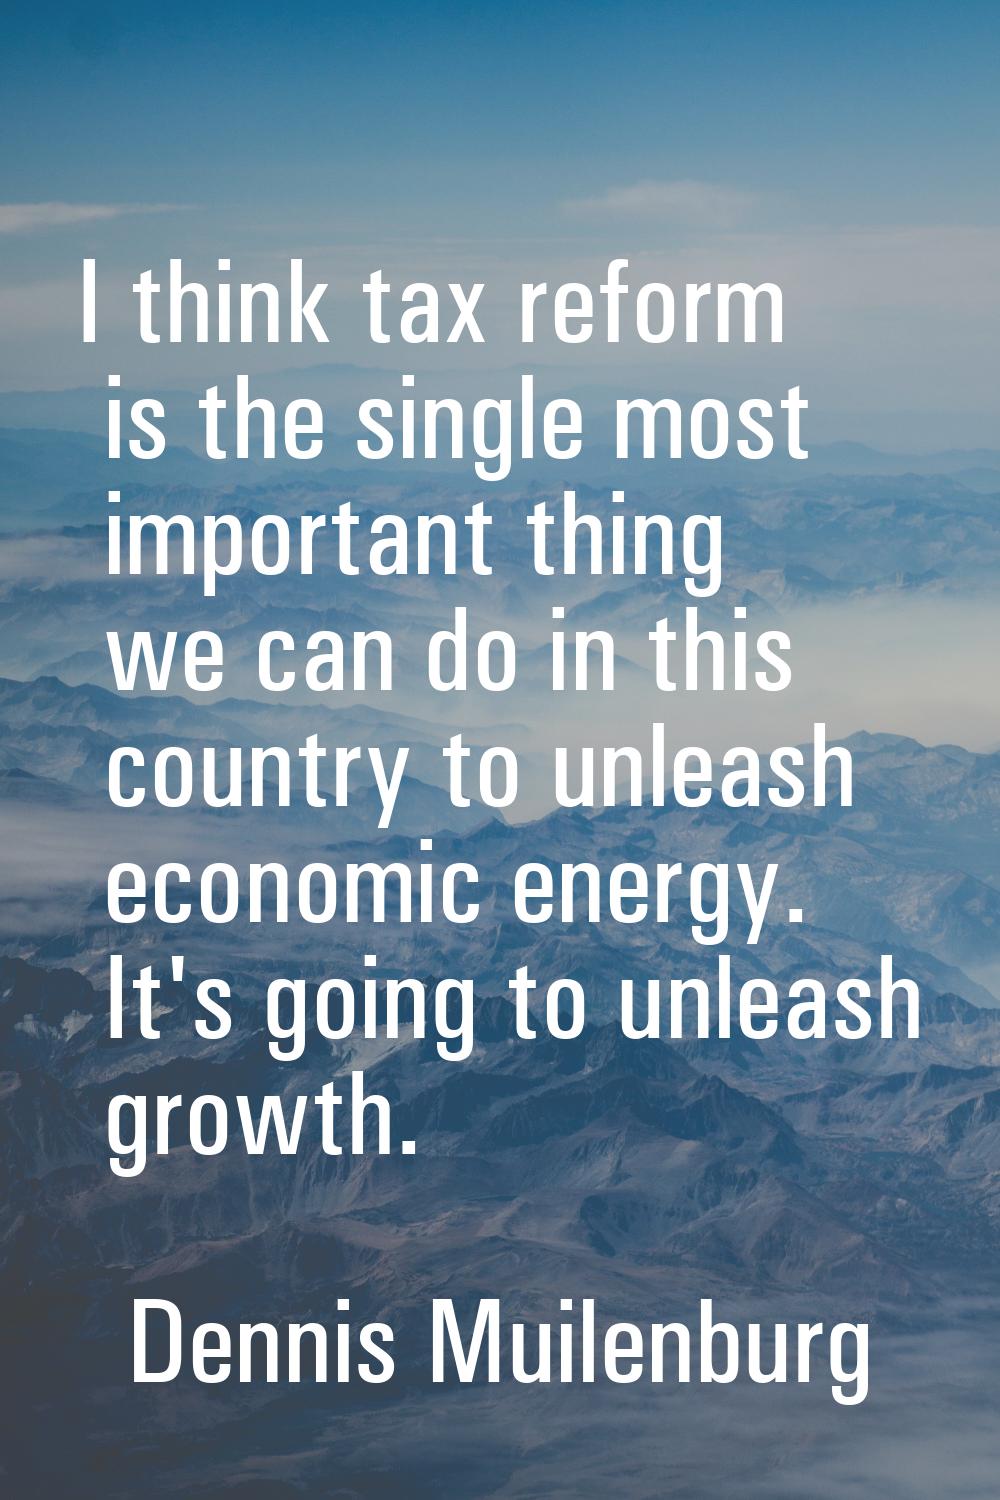 I think tax reform is the single most important thing we can do in this country to unleash economic